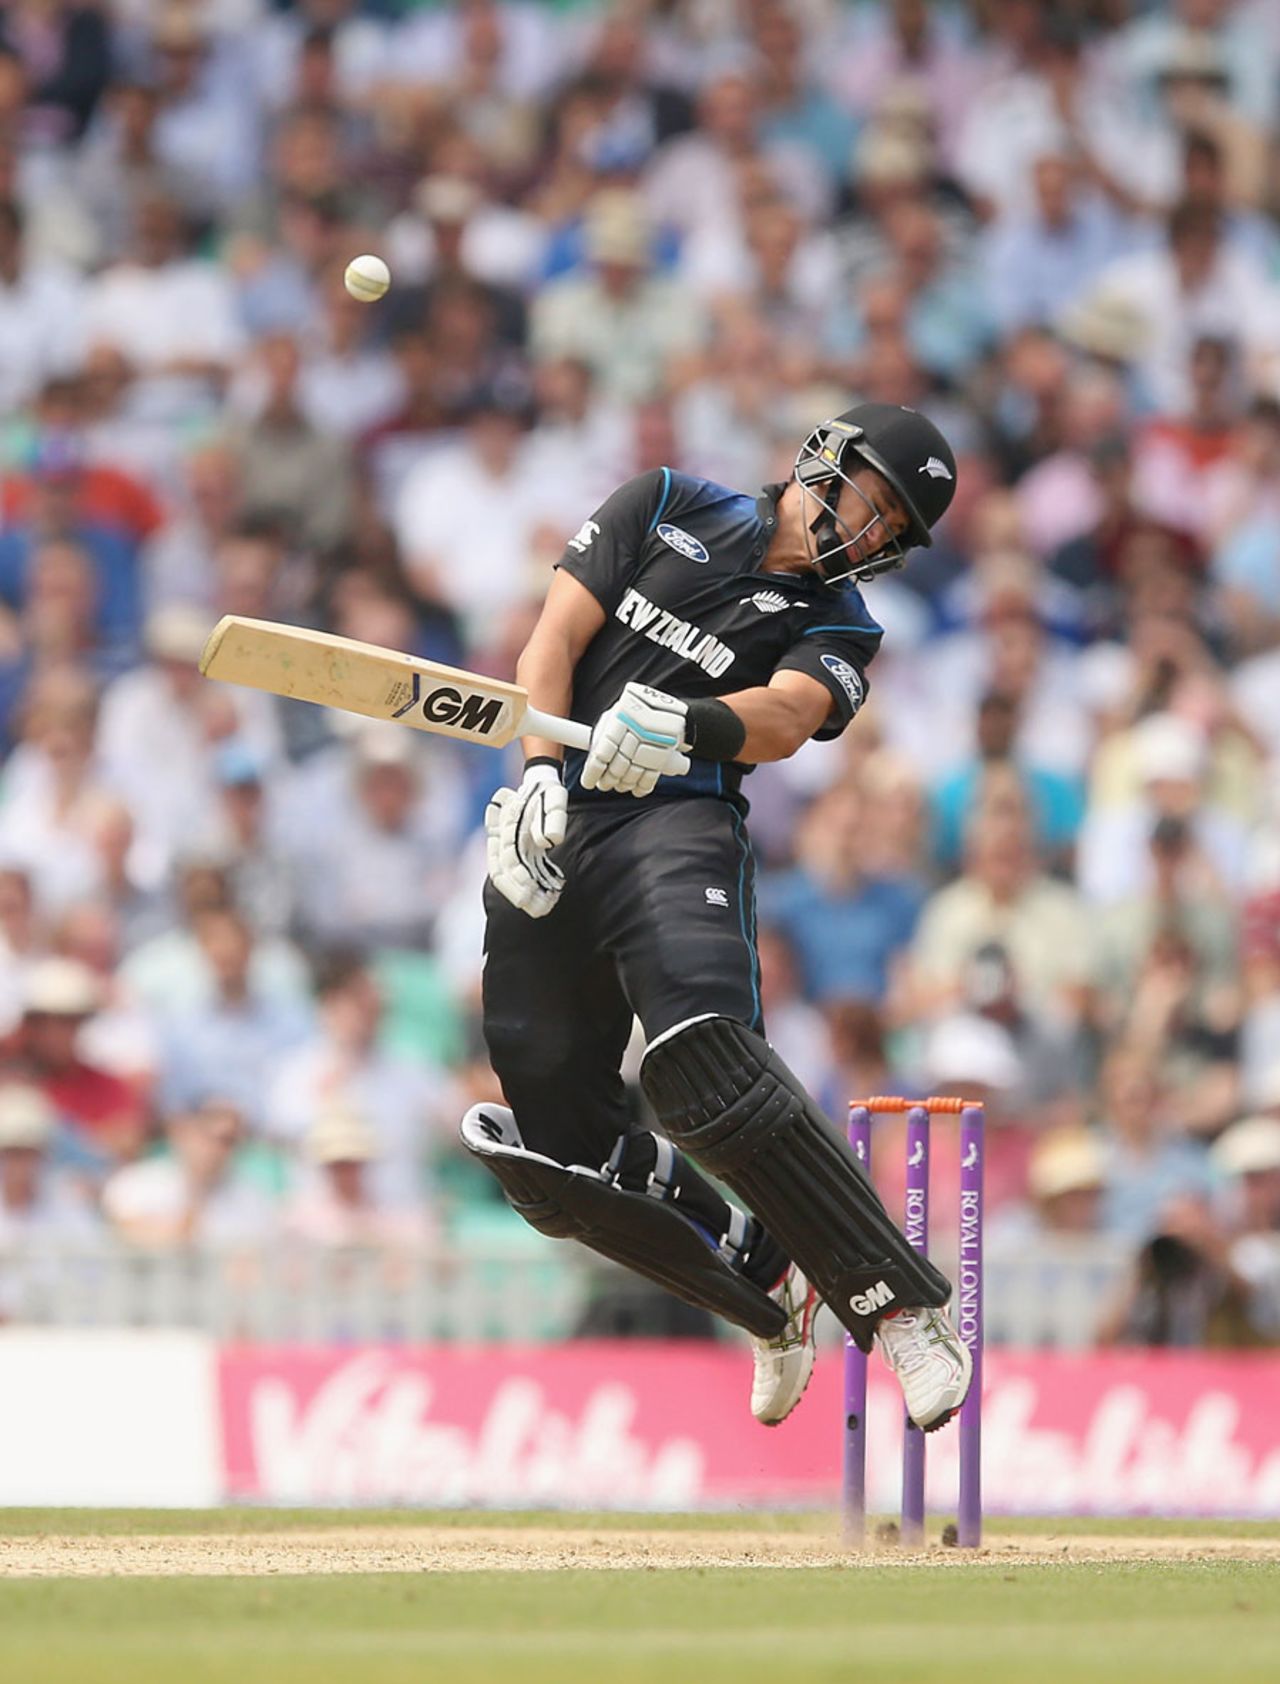 Ross Taylor took a blow from a short ball, England v New Zealand, 2nd ODI, Kia Oval, June 12, 2015